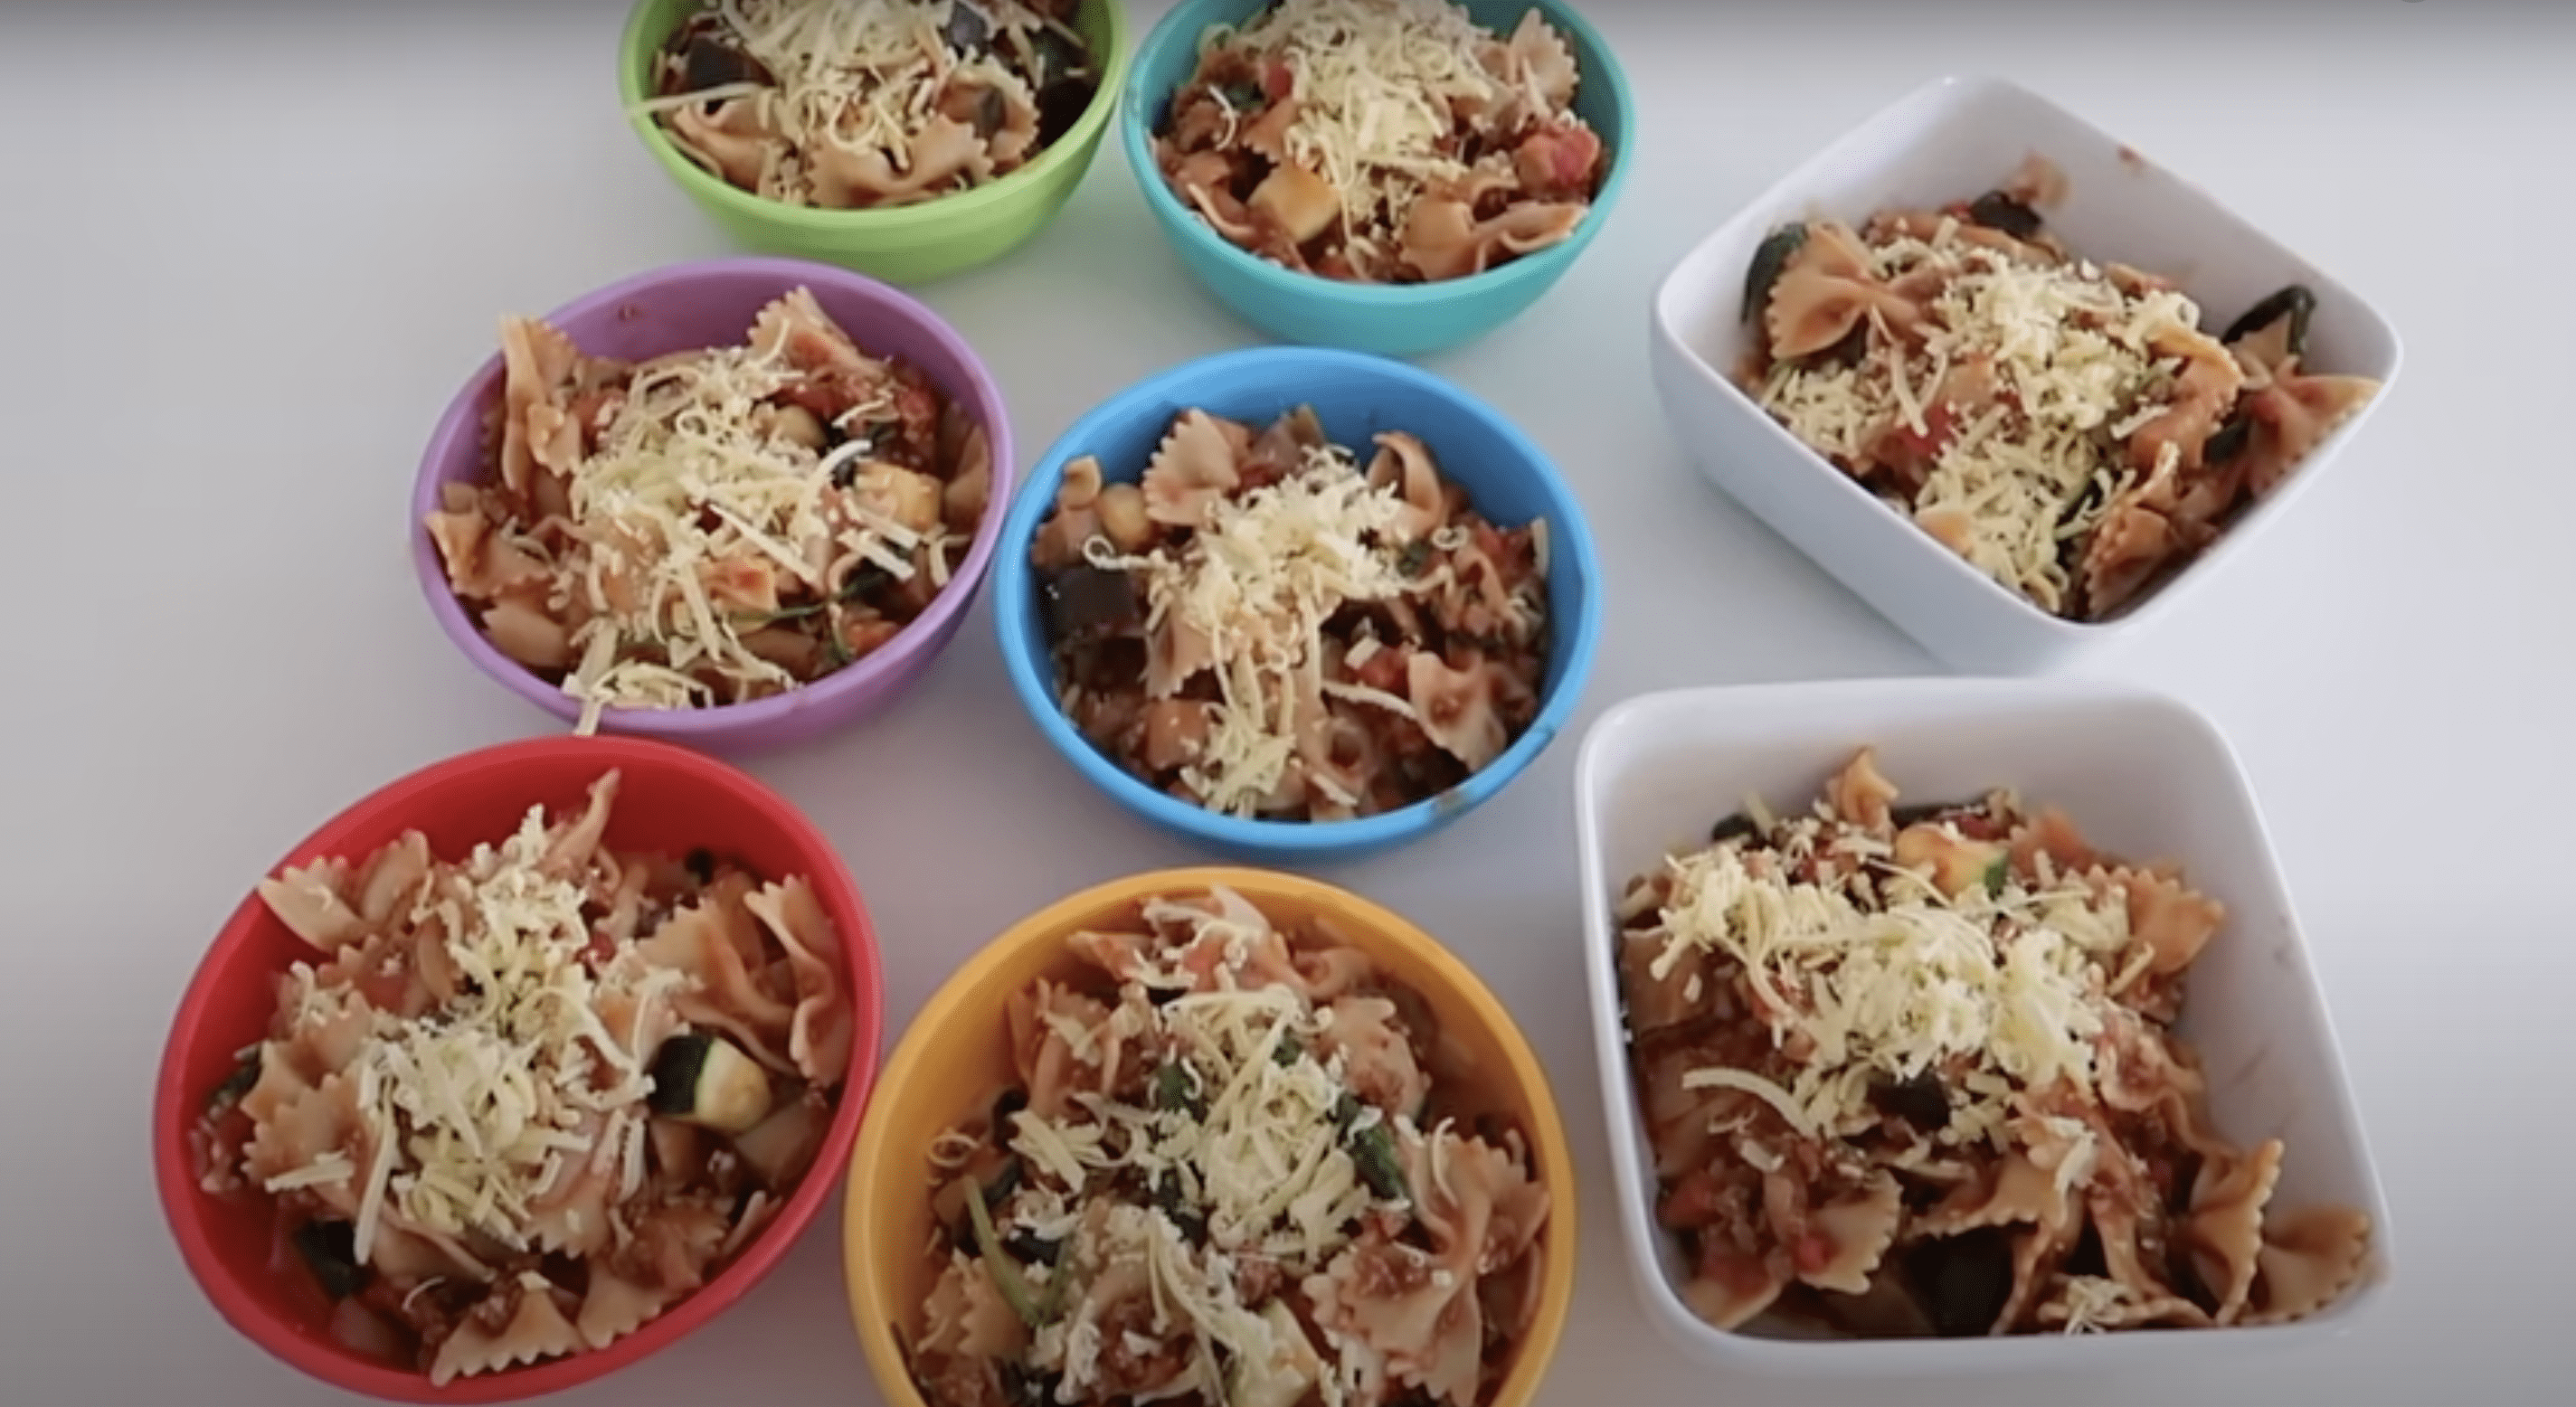 Pasta is served in bowls for each Dunstan child.  |  Source: YouTube.com/Life with Beans